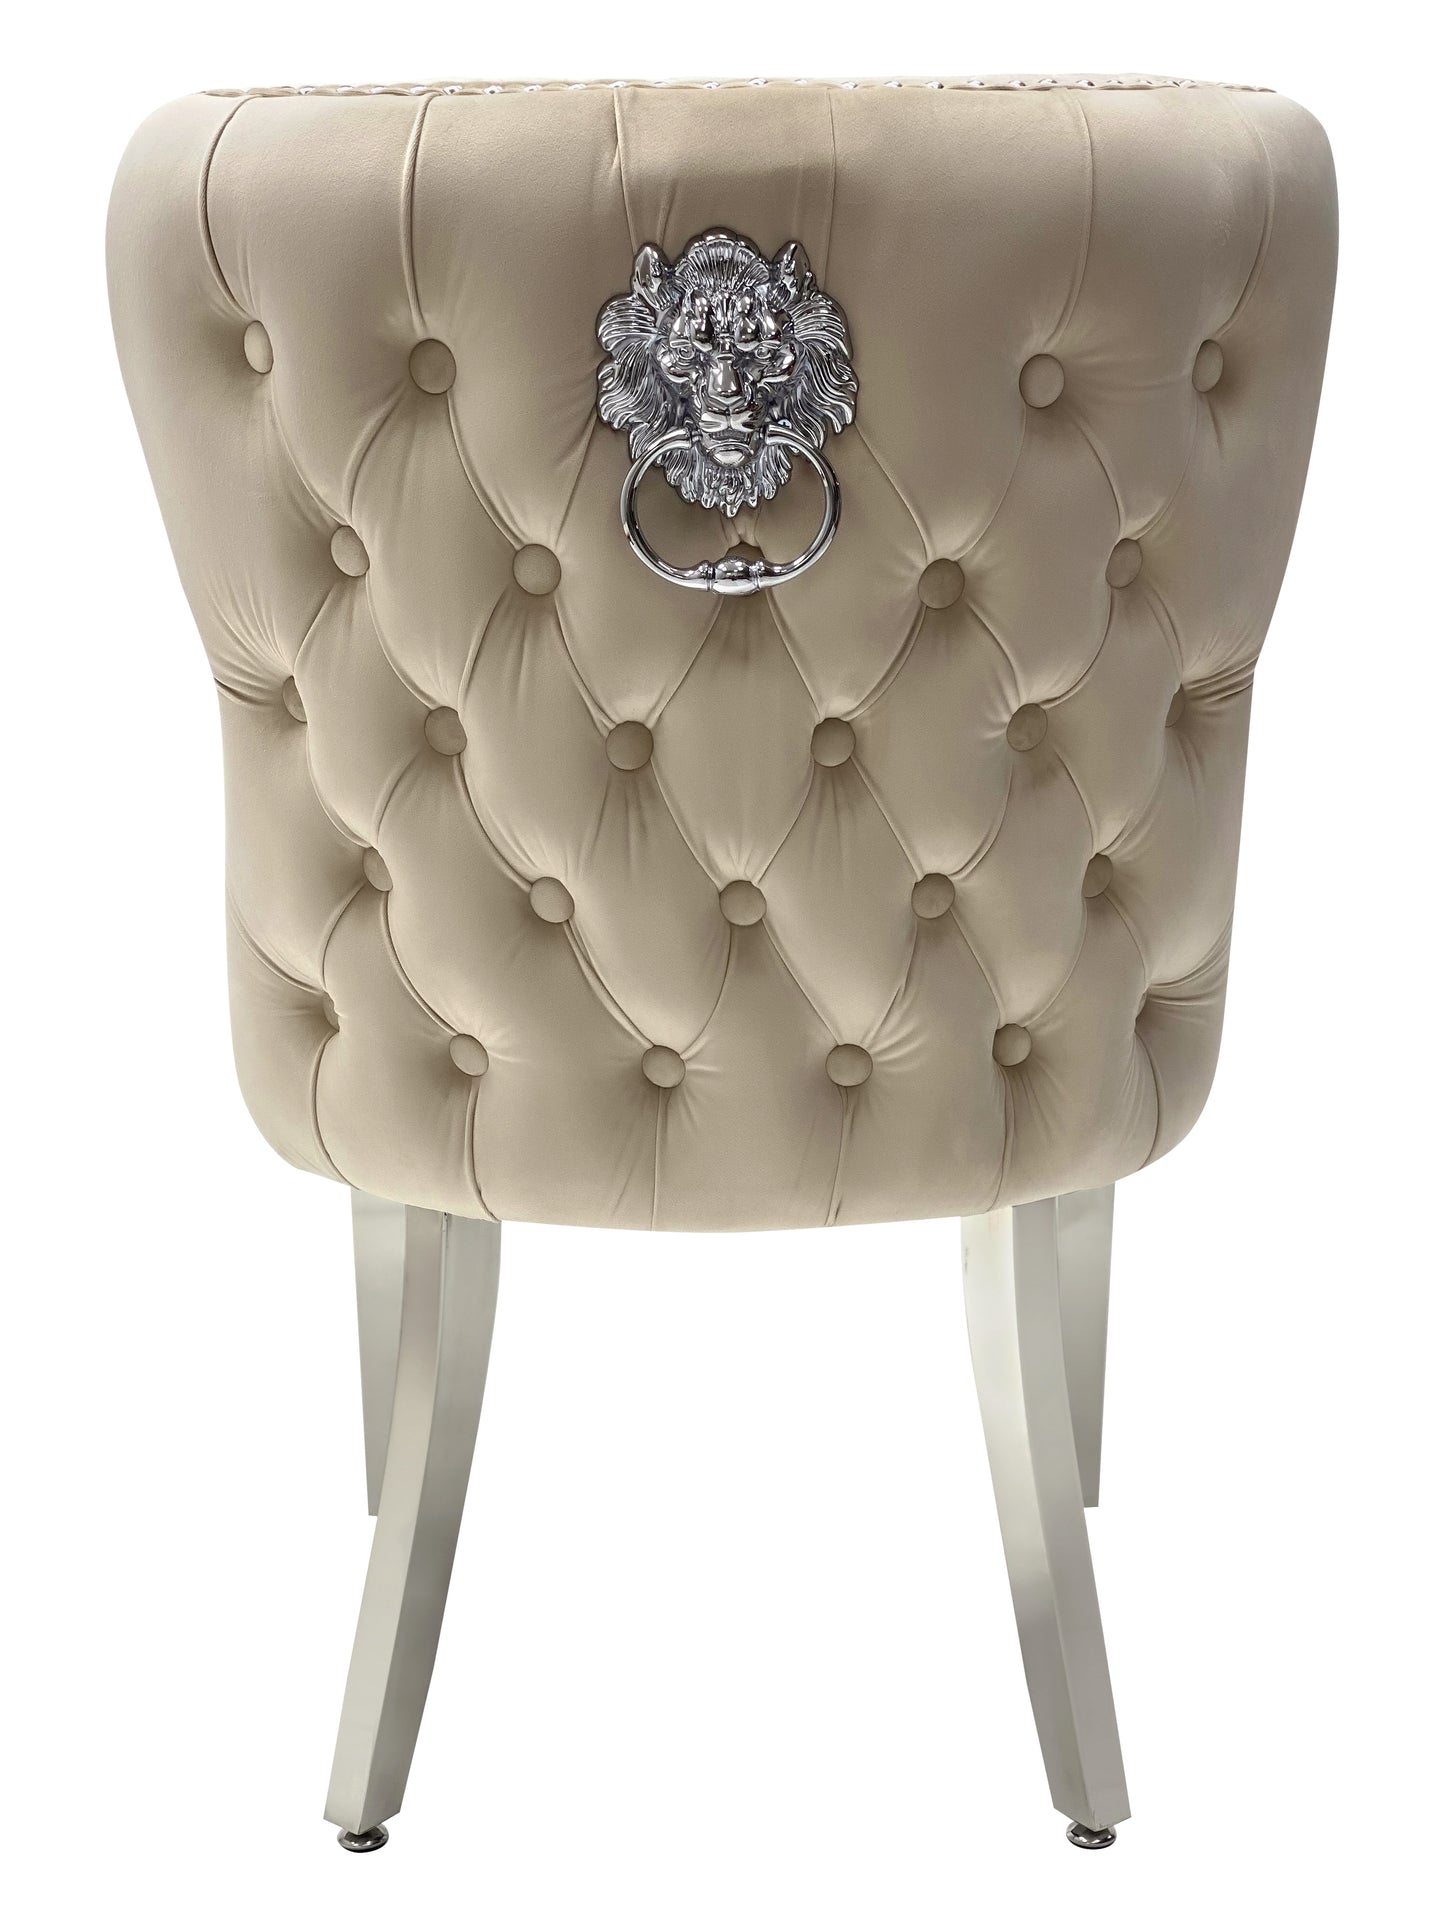 Dining Chair in Mink Plush Velvet Lion Knocker Head Lewis Buttoned Back Quilted Front Studs on the Edge with Chrome Legs (Set of 2 chairs)